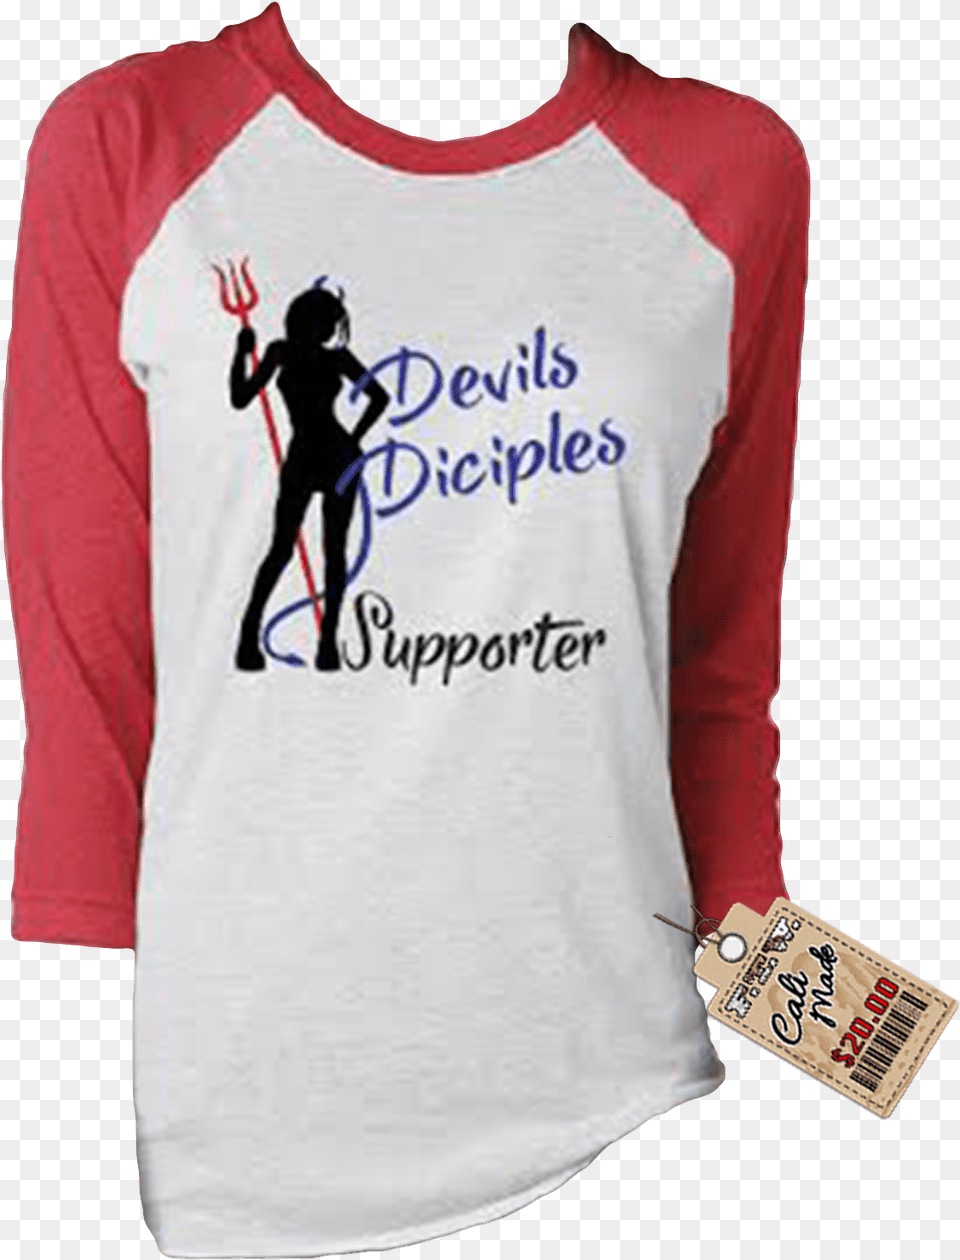 Pitch Fork Ladies Supporters Long Sleeve T Shirt Merry And Bright Christmas Glitter Red Raglan Baseball, T-shirt, Clothing, Long Sleeve, Adult Png Image